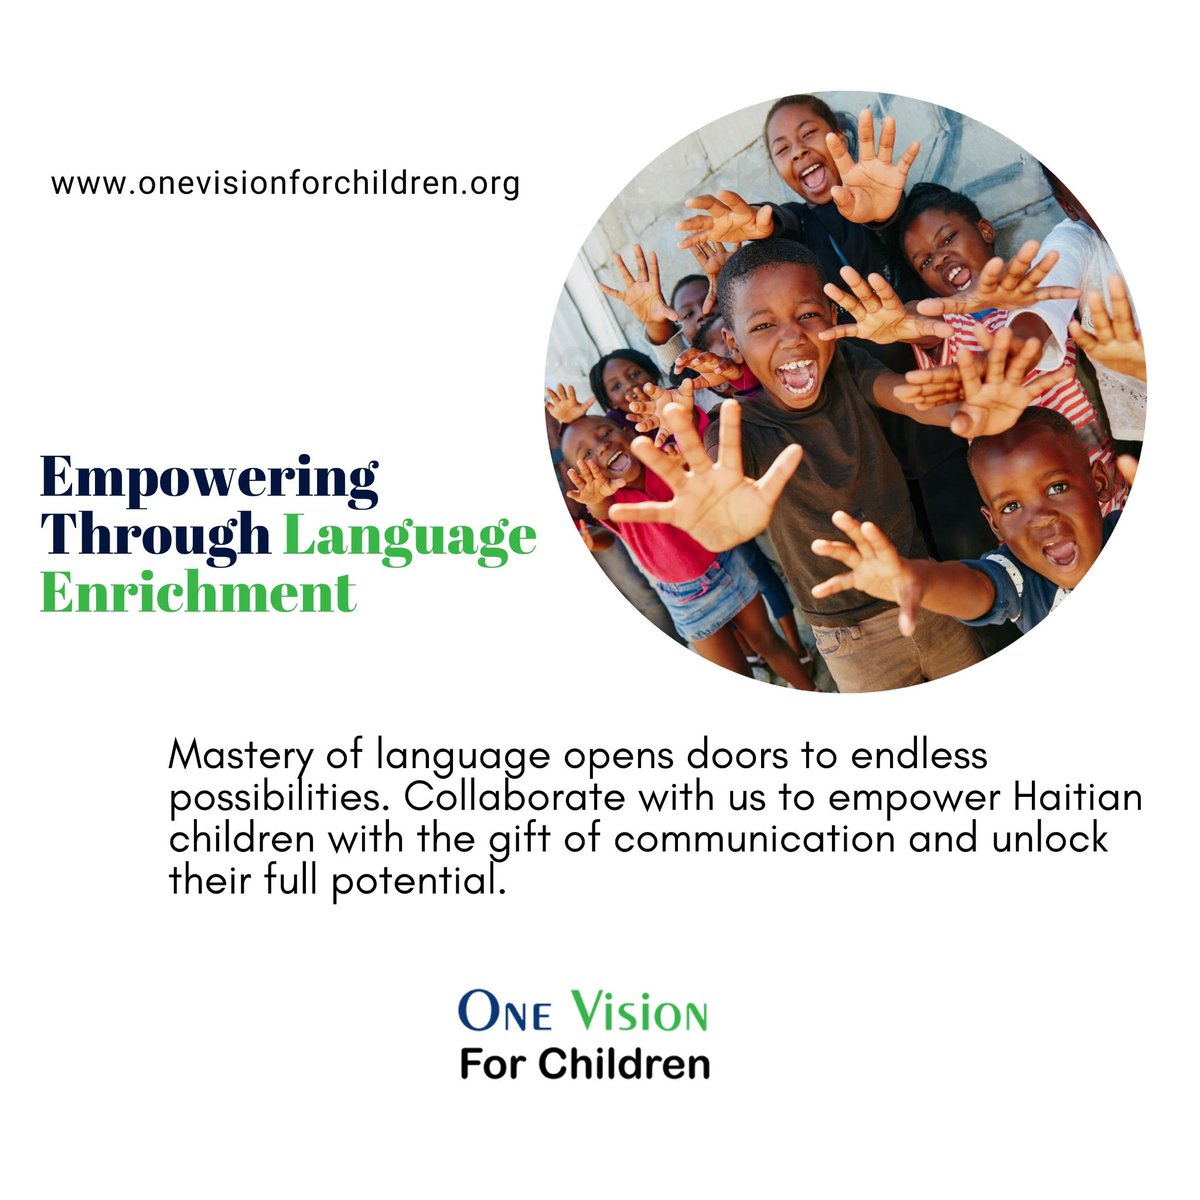 Mastery of language opens doors to endless possibilities. Collaborate with us to empower Haitian children with the gift of communication and unlock their full potential.
---
One Vision For Children - Haitian Children | Healthcare | Education
.
#LinguisticJourney #UnlockingDreams